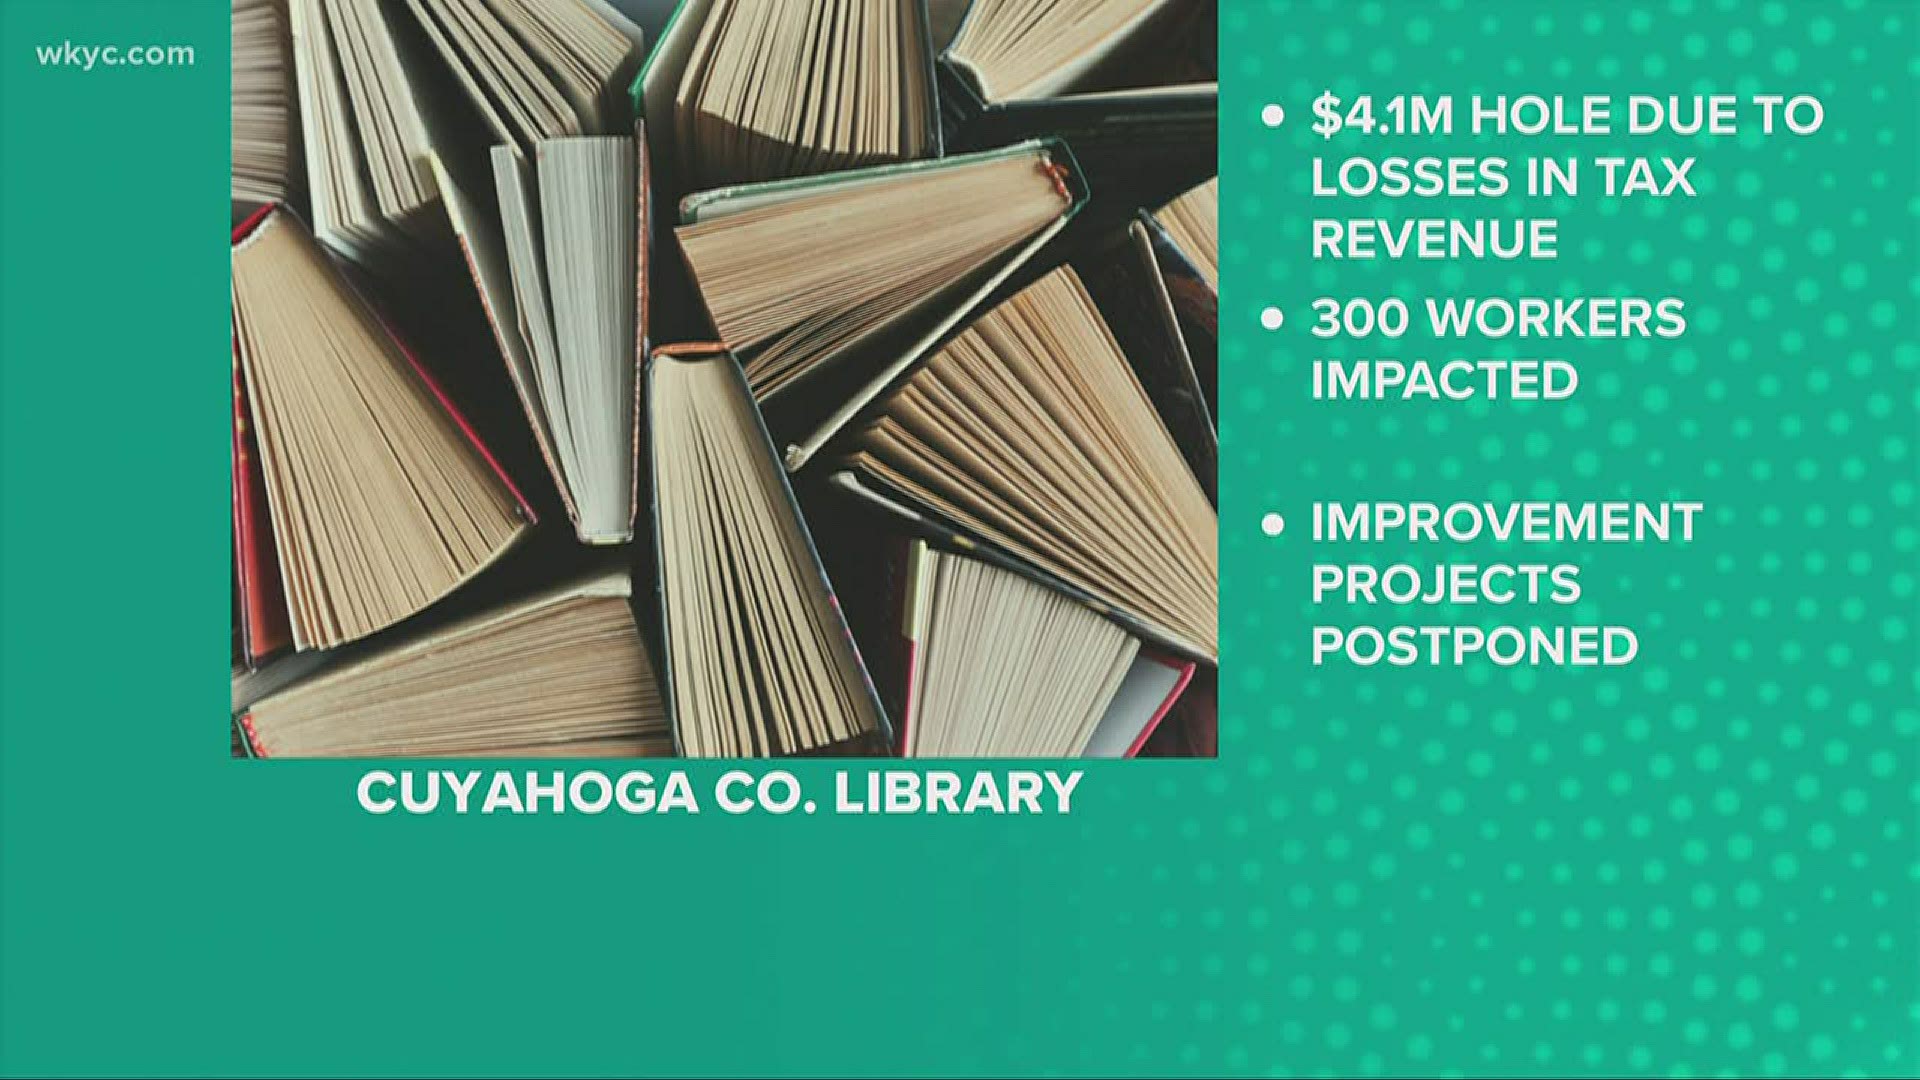 The library is efforting to address a projected $5 million budget shortfall during the current COVID-19 pandemic. Remaining employees will work a reduced schedule.